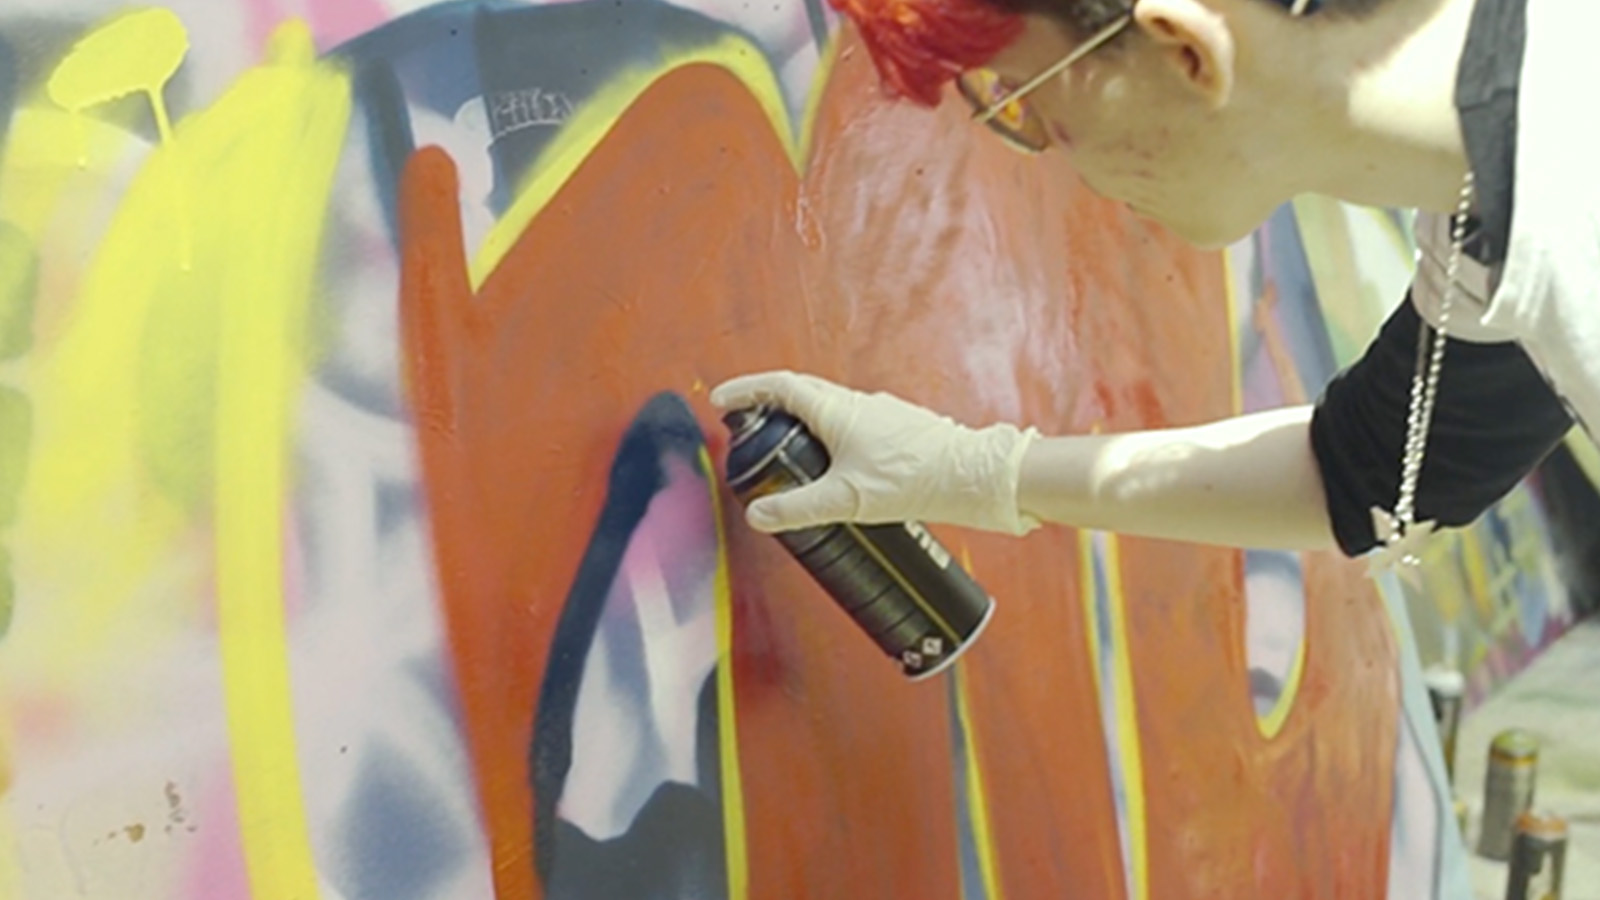 A young person carefully examines their artwork as they apply spraypaint